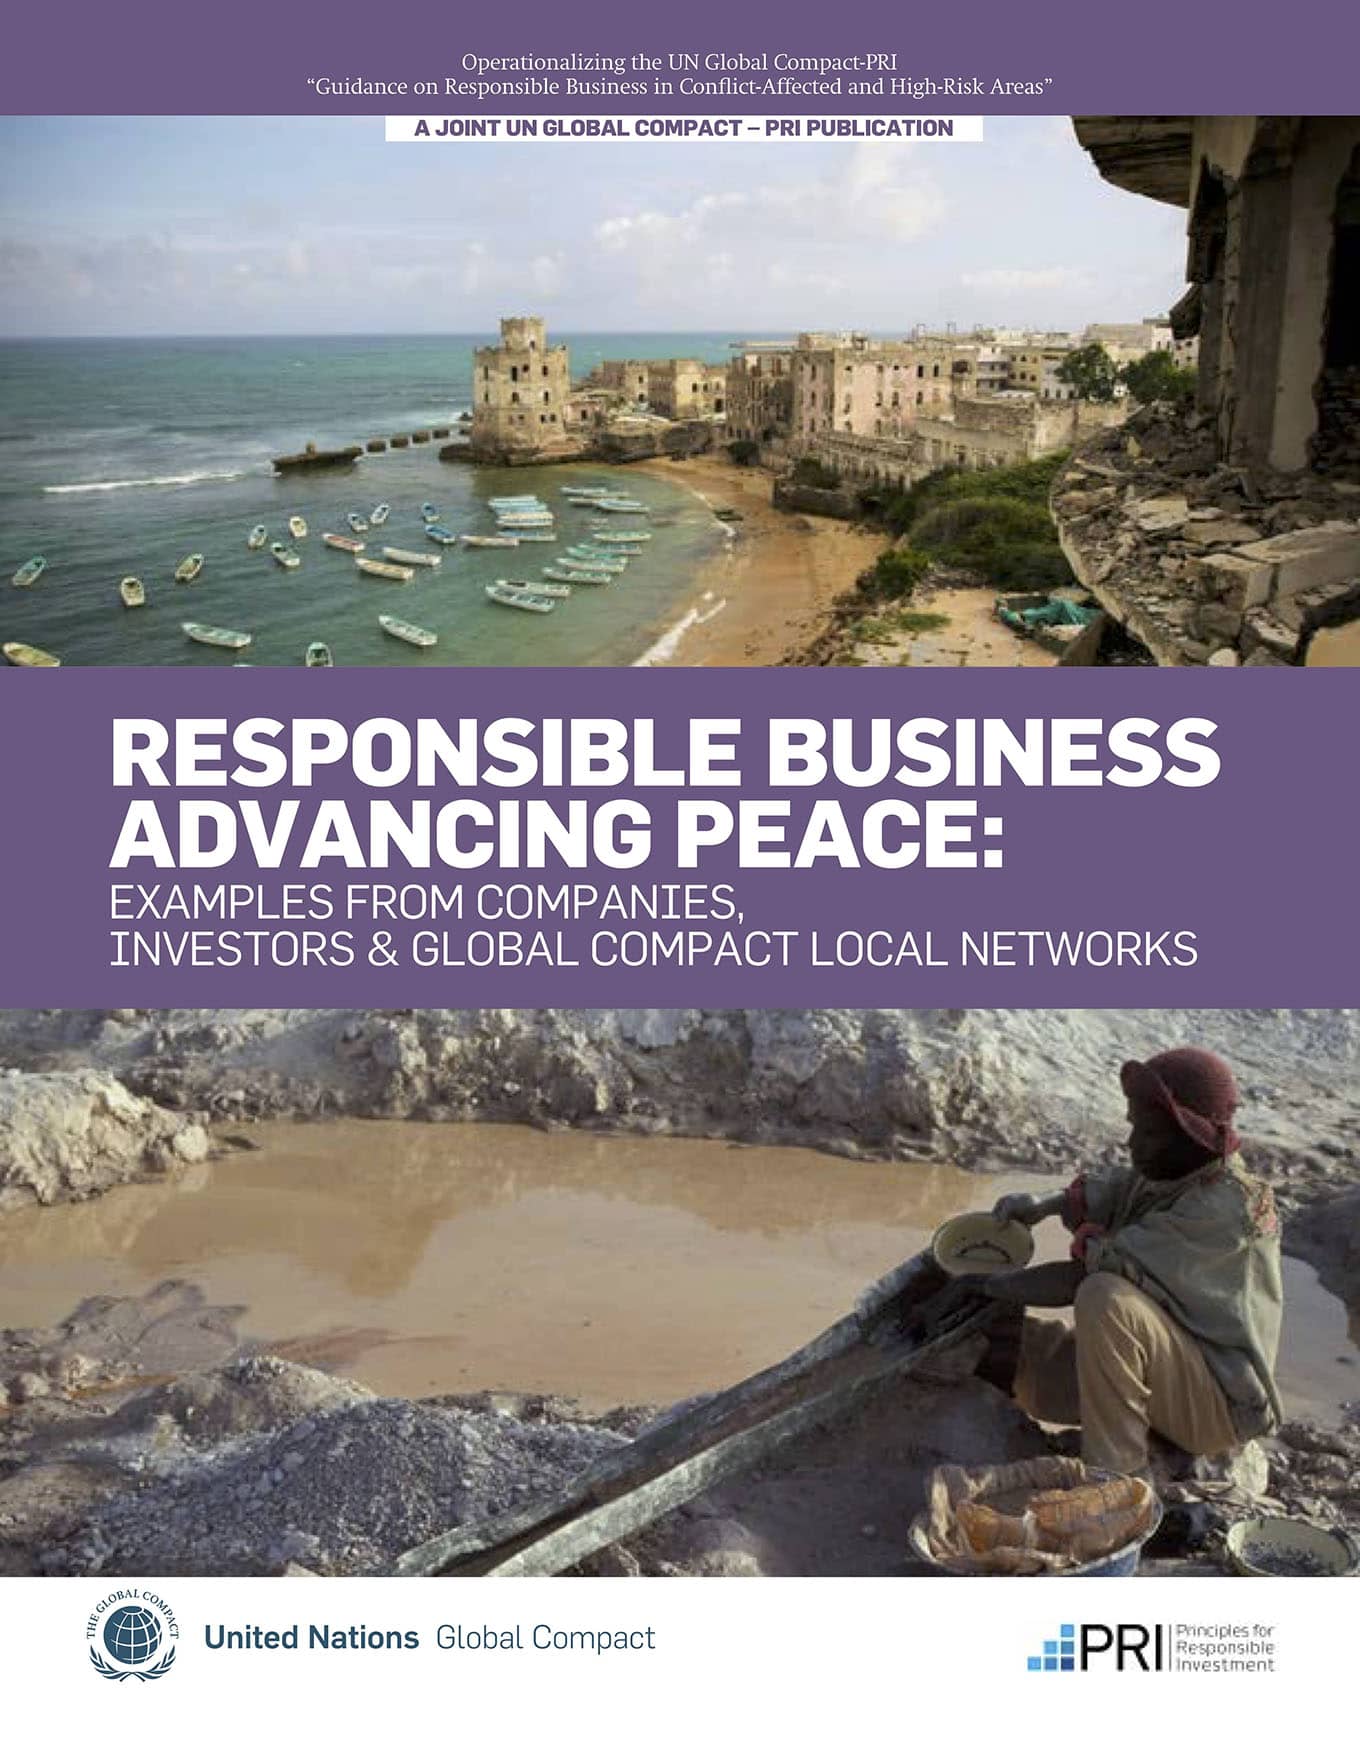 Responsible Business Advancing Peace: Examples from Companies, Investors & Global Compact Local Networks (UN Global Compact and PRI, 2013)